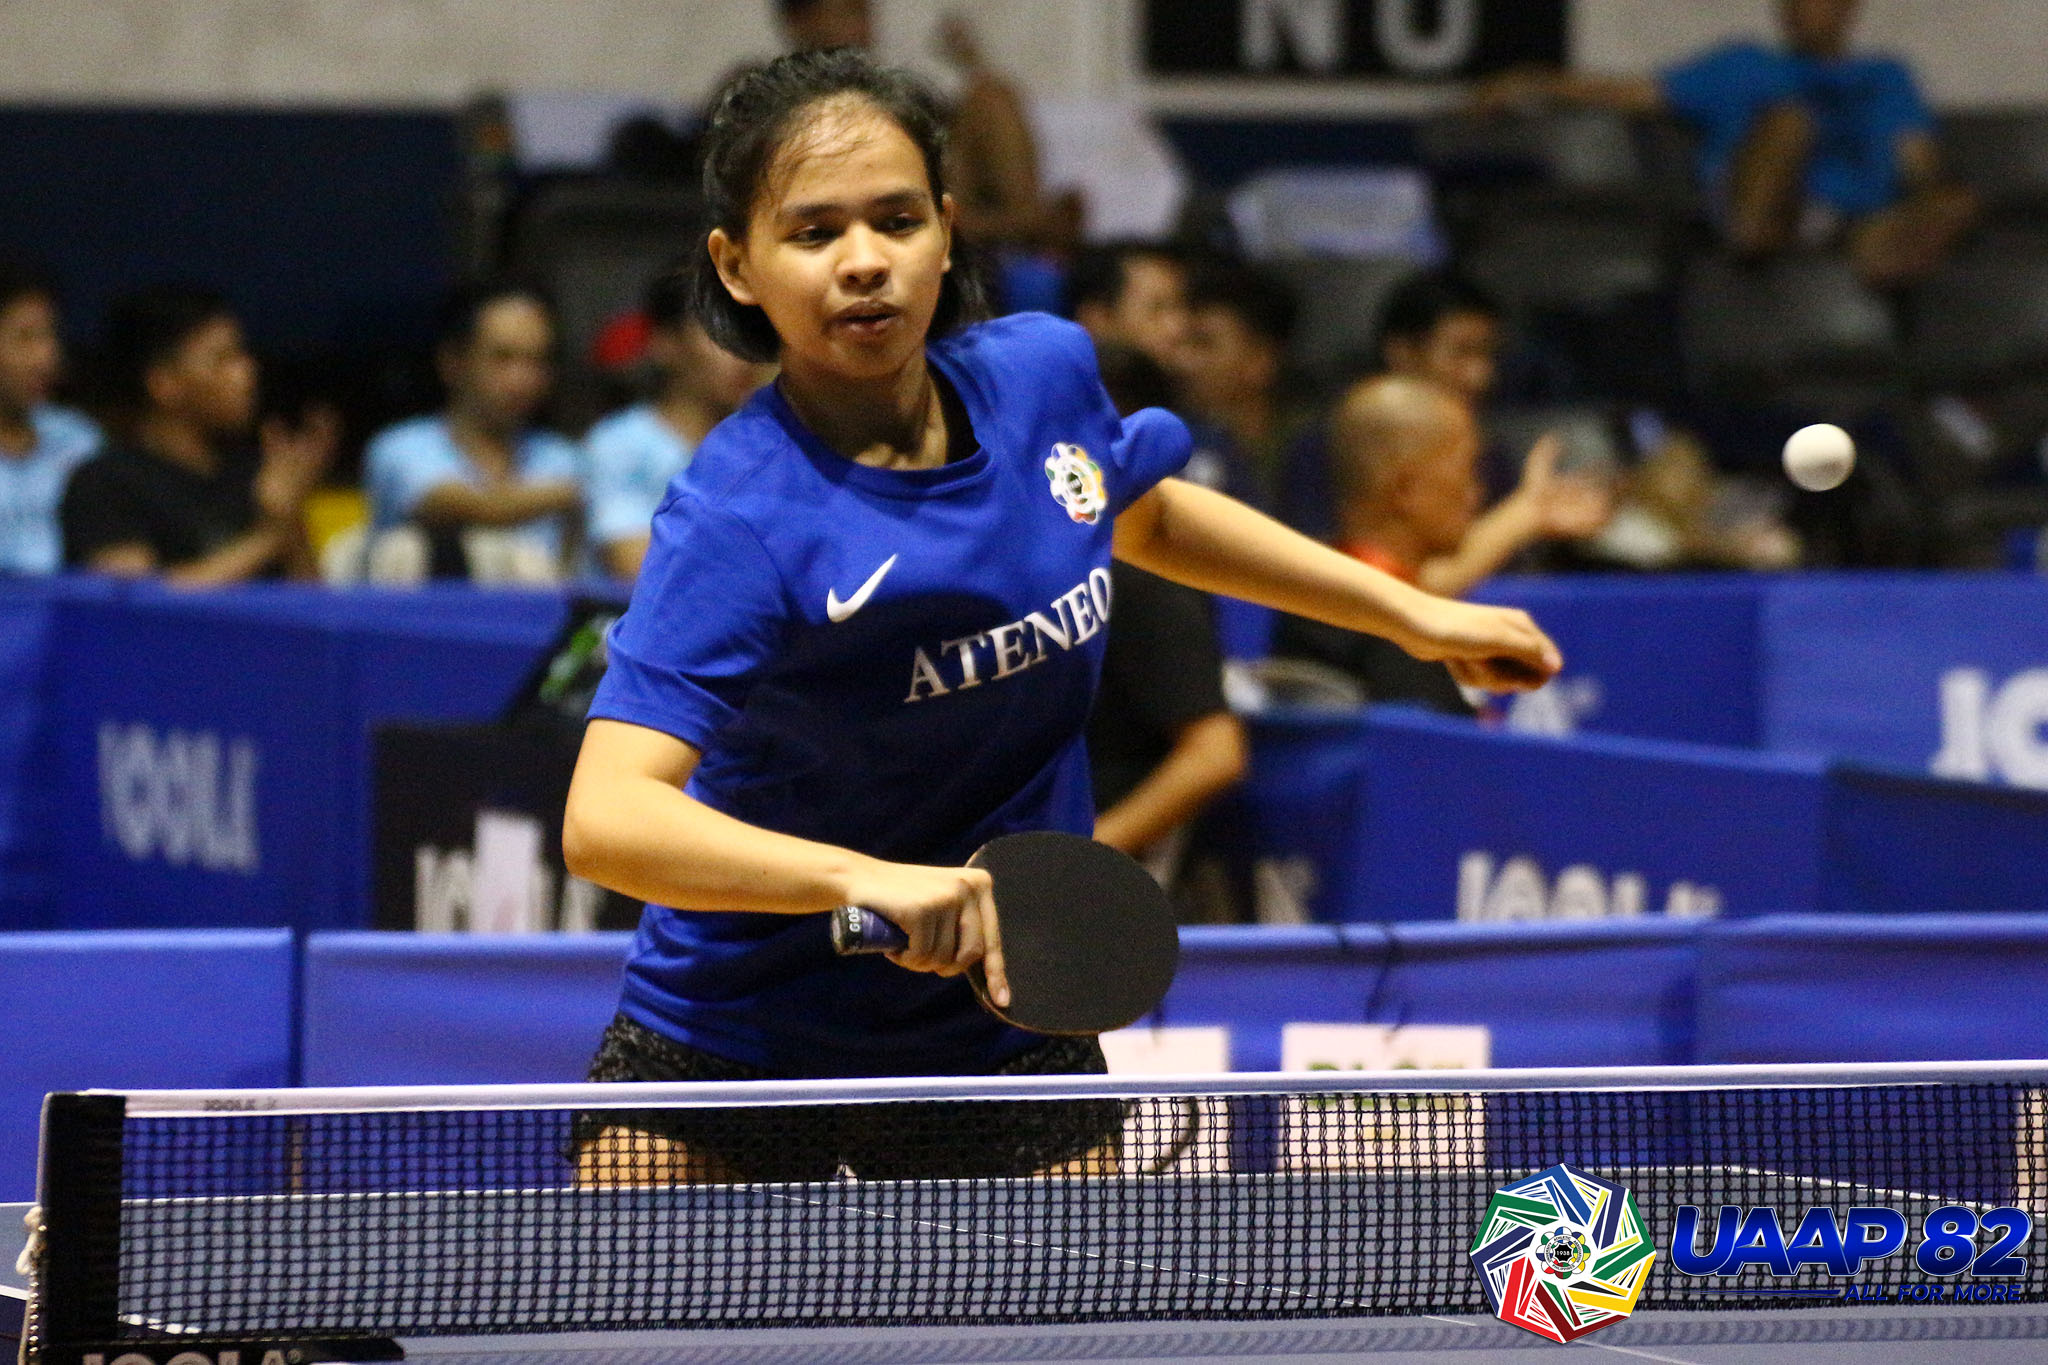 UAAP-82-Womens-Table-Tennis-ADMU-v-DLSU-Calvo UST, Ateneo to face off in UAAP Women's Table Tennis Finals ADMU DLSU FEU News Table Tennis UAAP UST  - philippine sports news